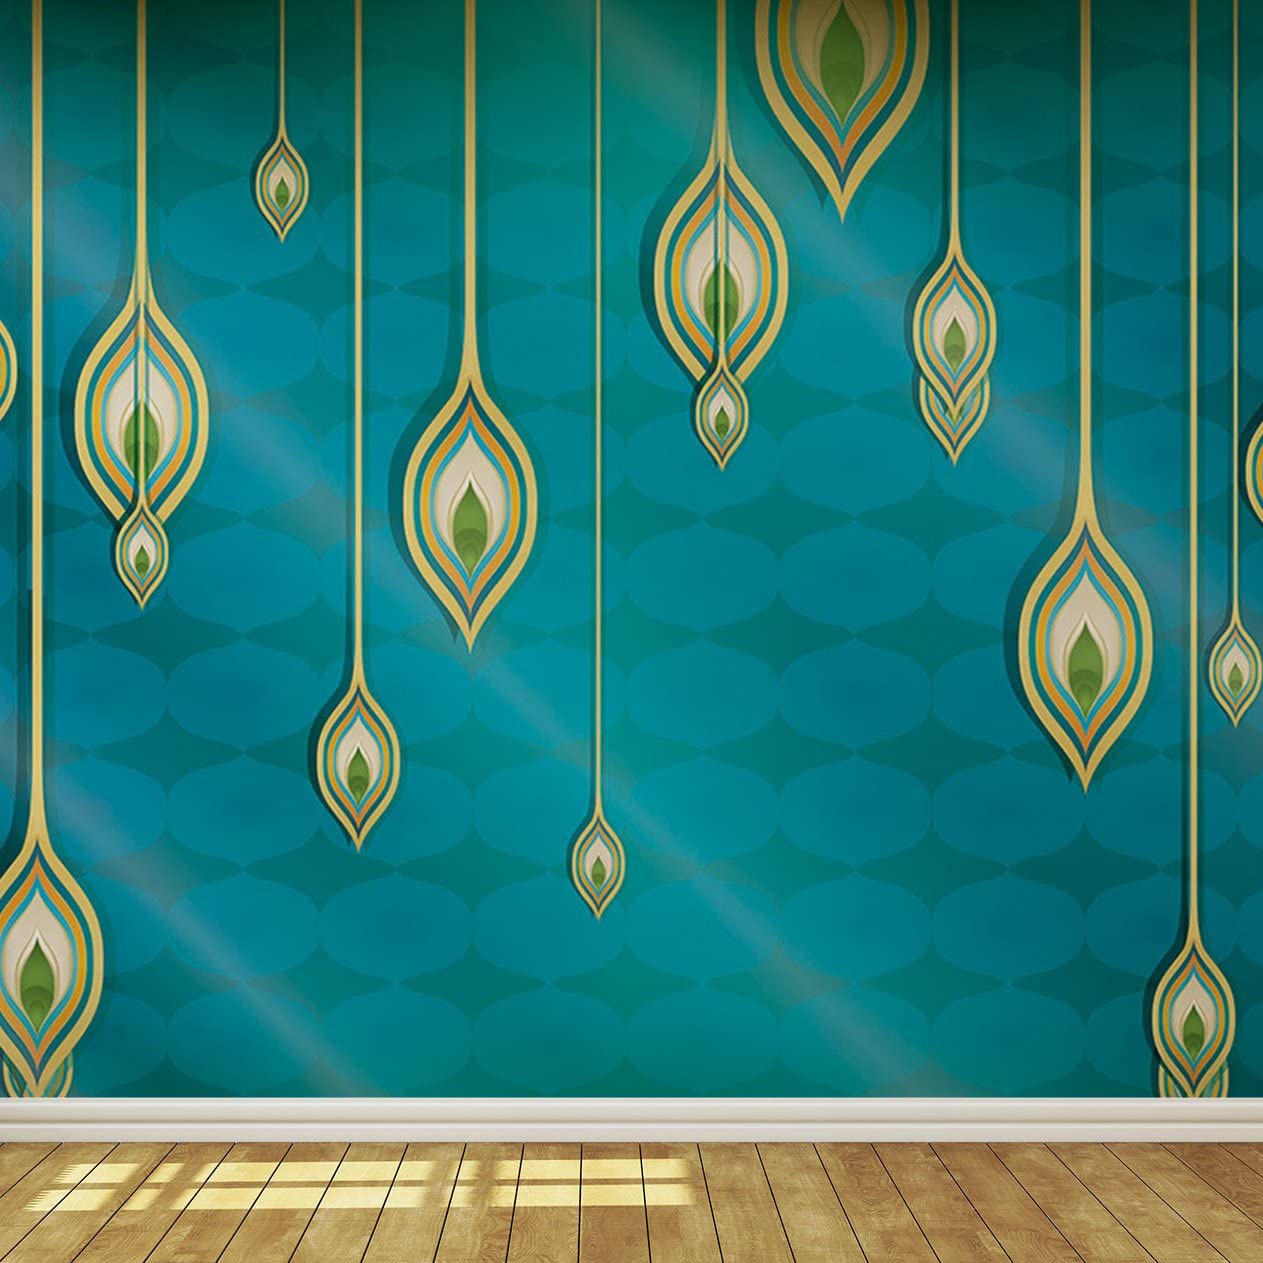 Blue Teal And Gold Exotic Indian Design Wallpaper Mural - Indian Design , HD Wallpaper & Backgrounds